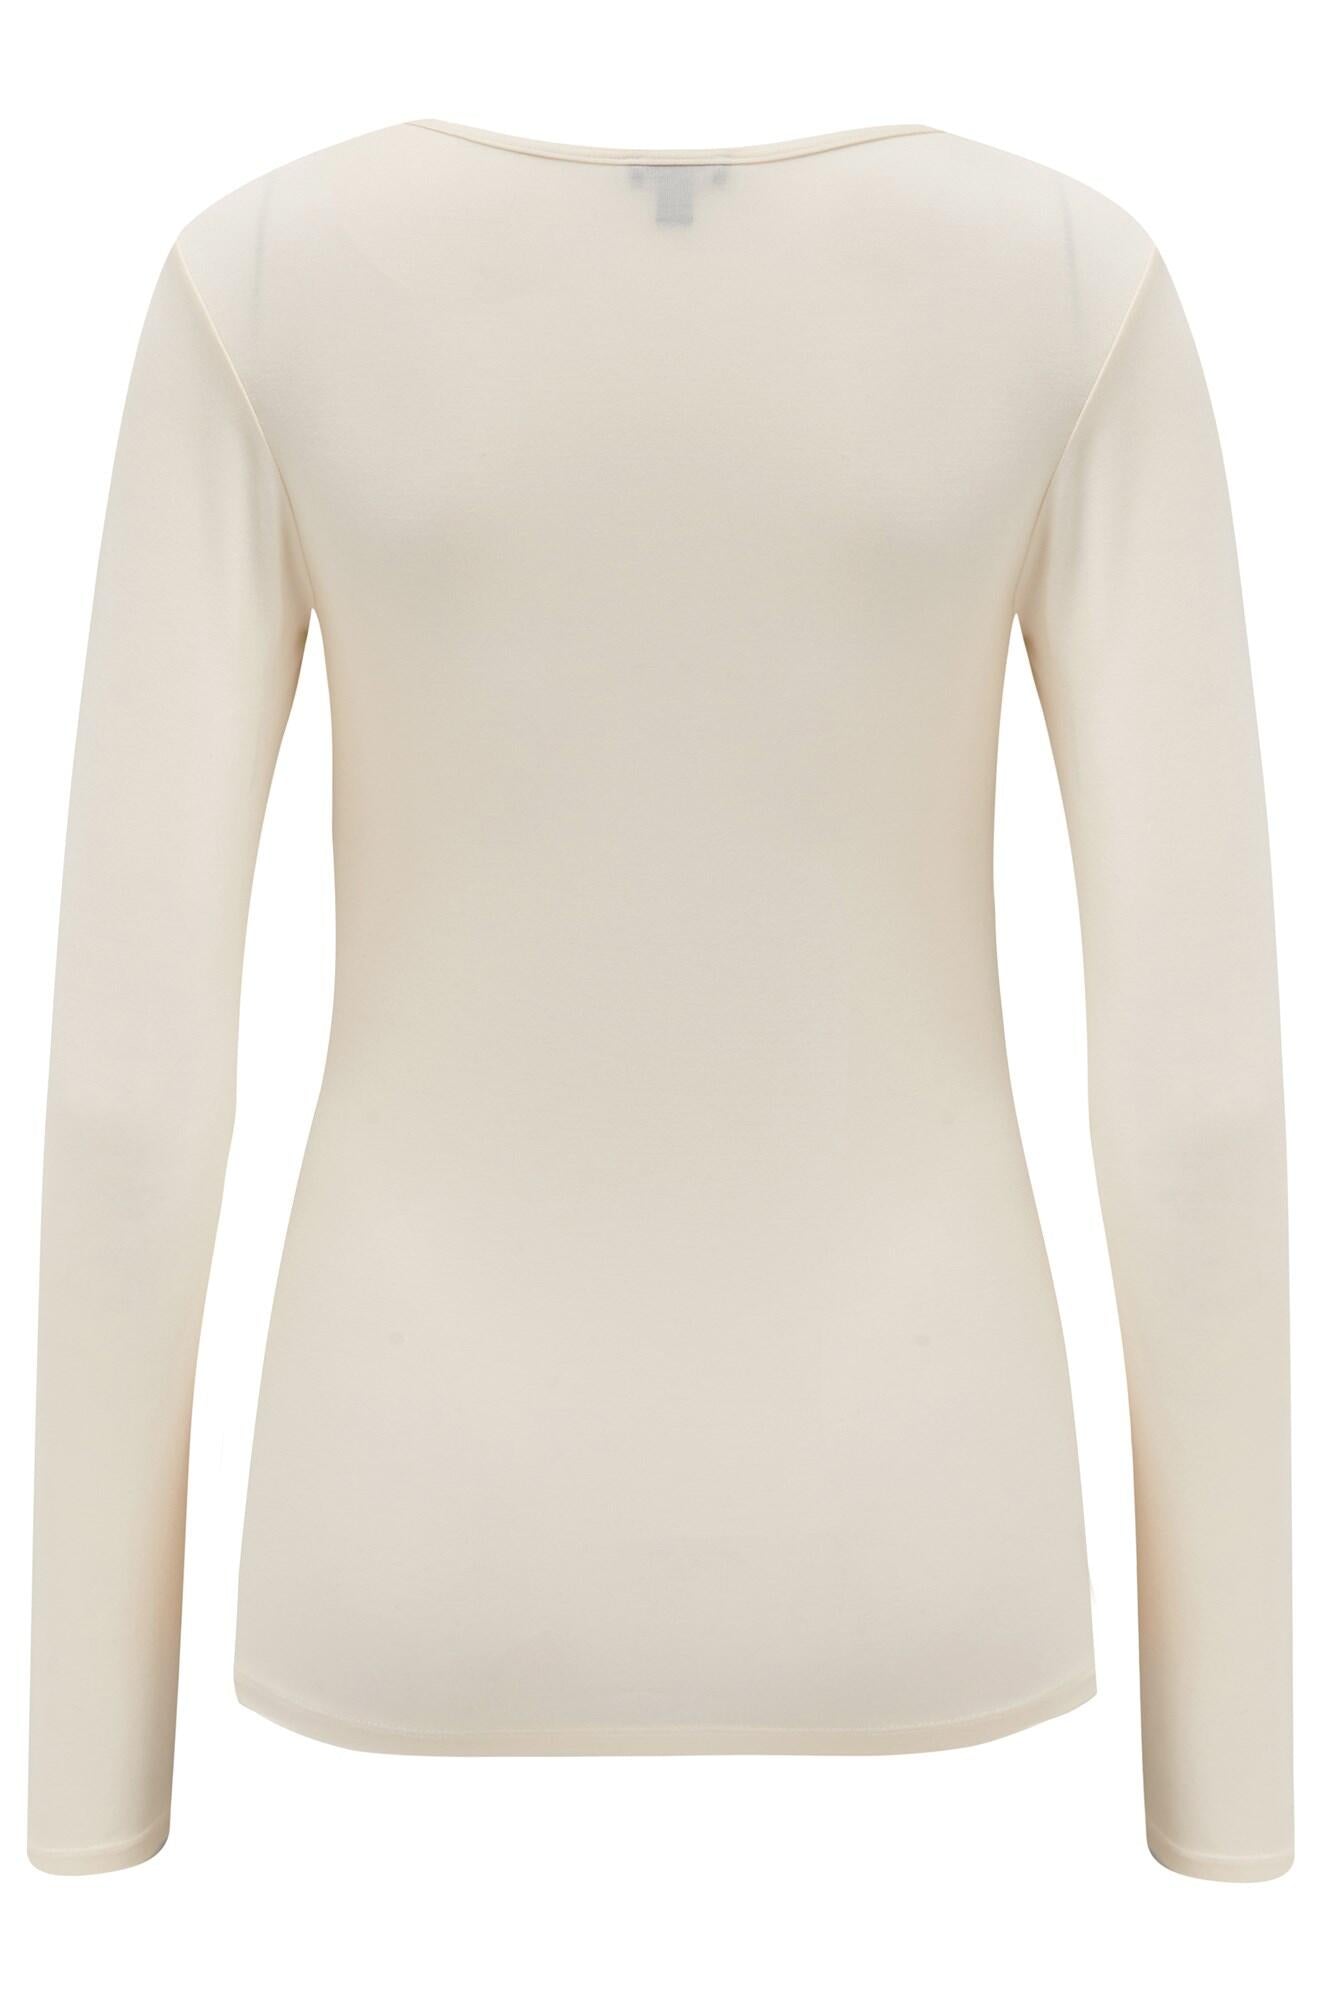 Pour Moi Second Skin Thermal Long Sleeve Vest Top